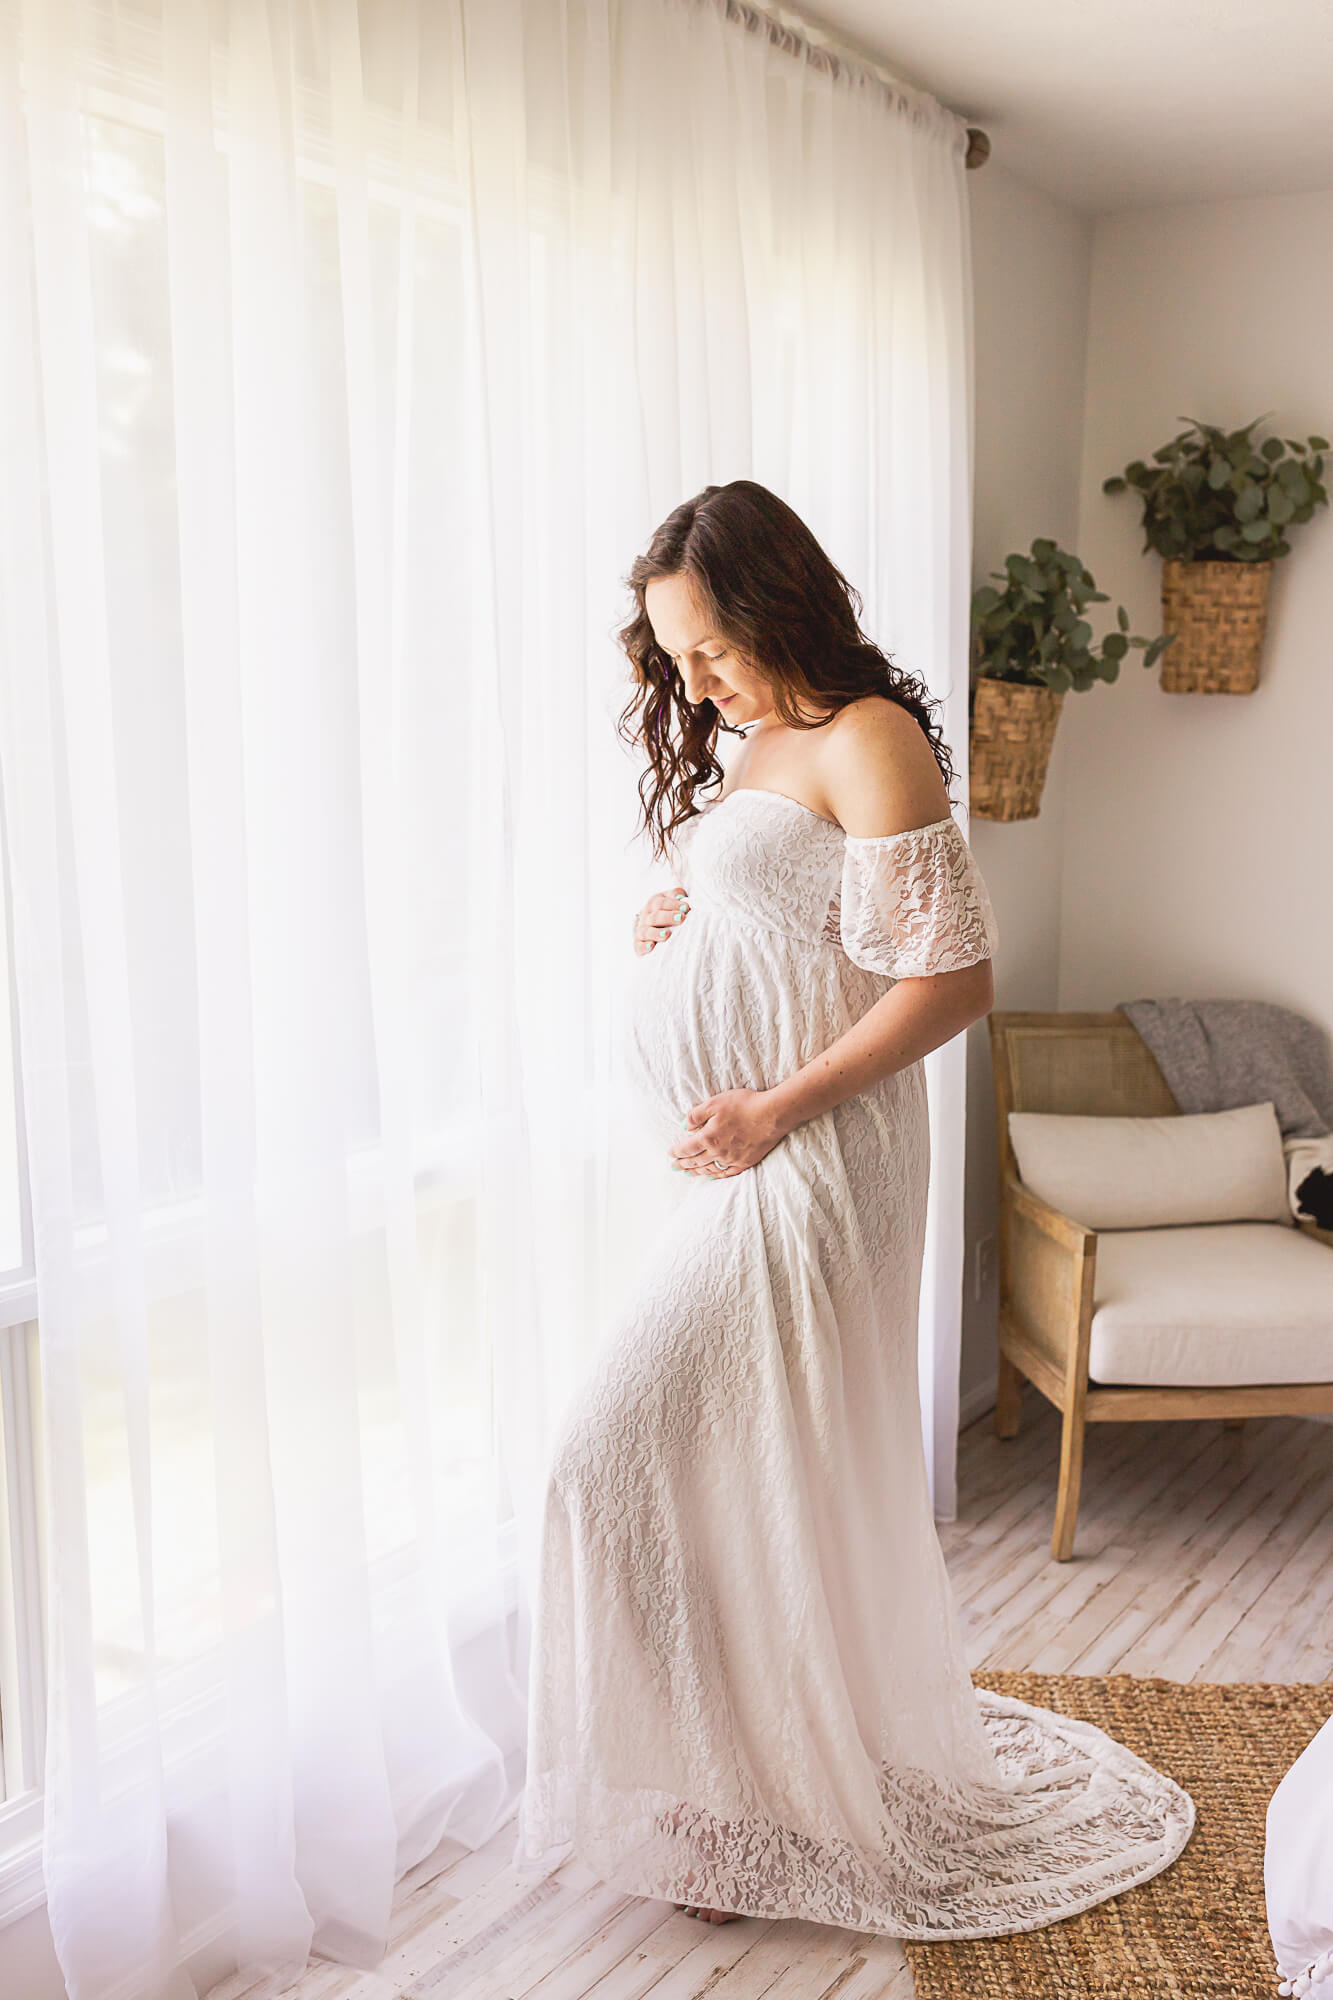 mom to be in off the shoulder white lace gown standing near a window